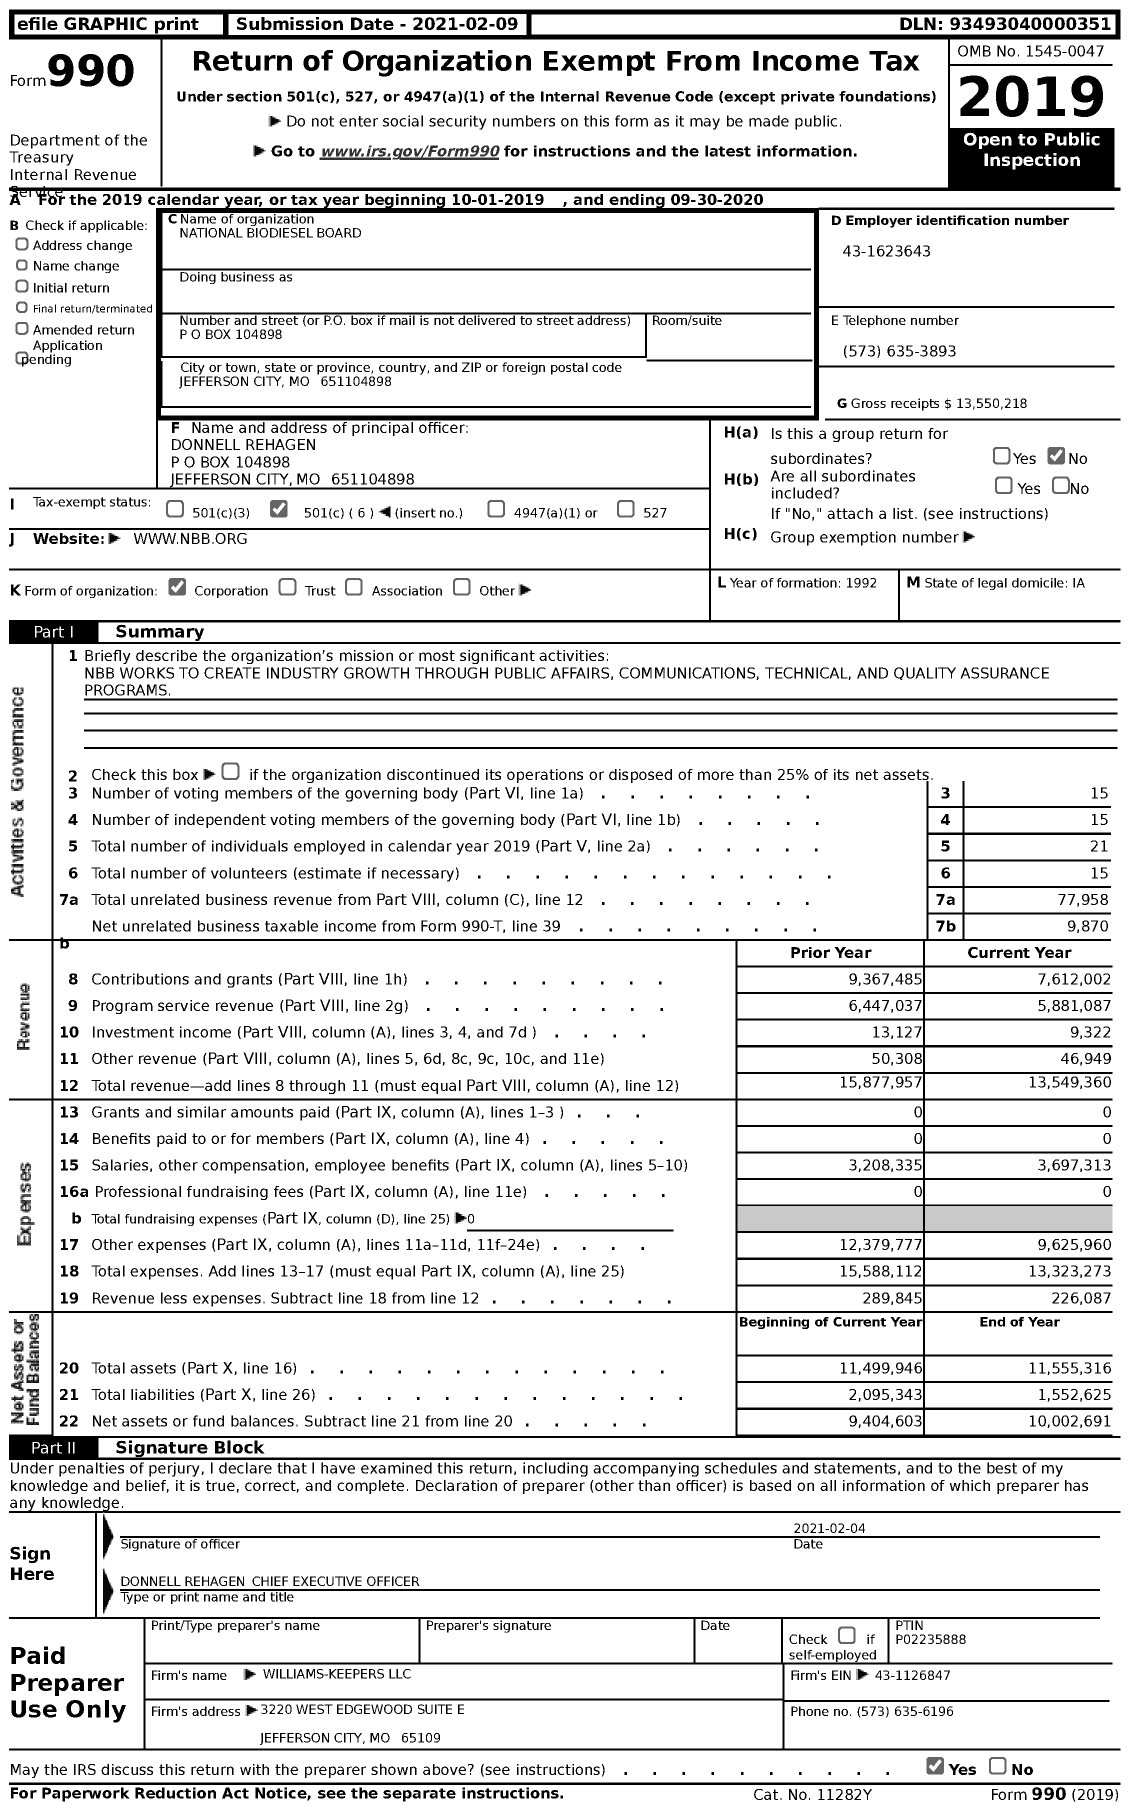 Image of first page of 2019 Form 990 for Clean Fuels Alliance America (NBB)